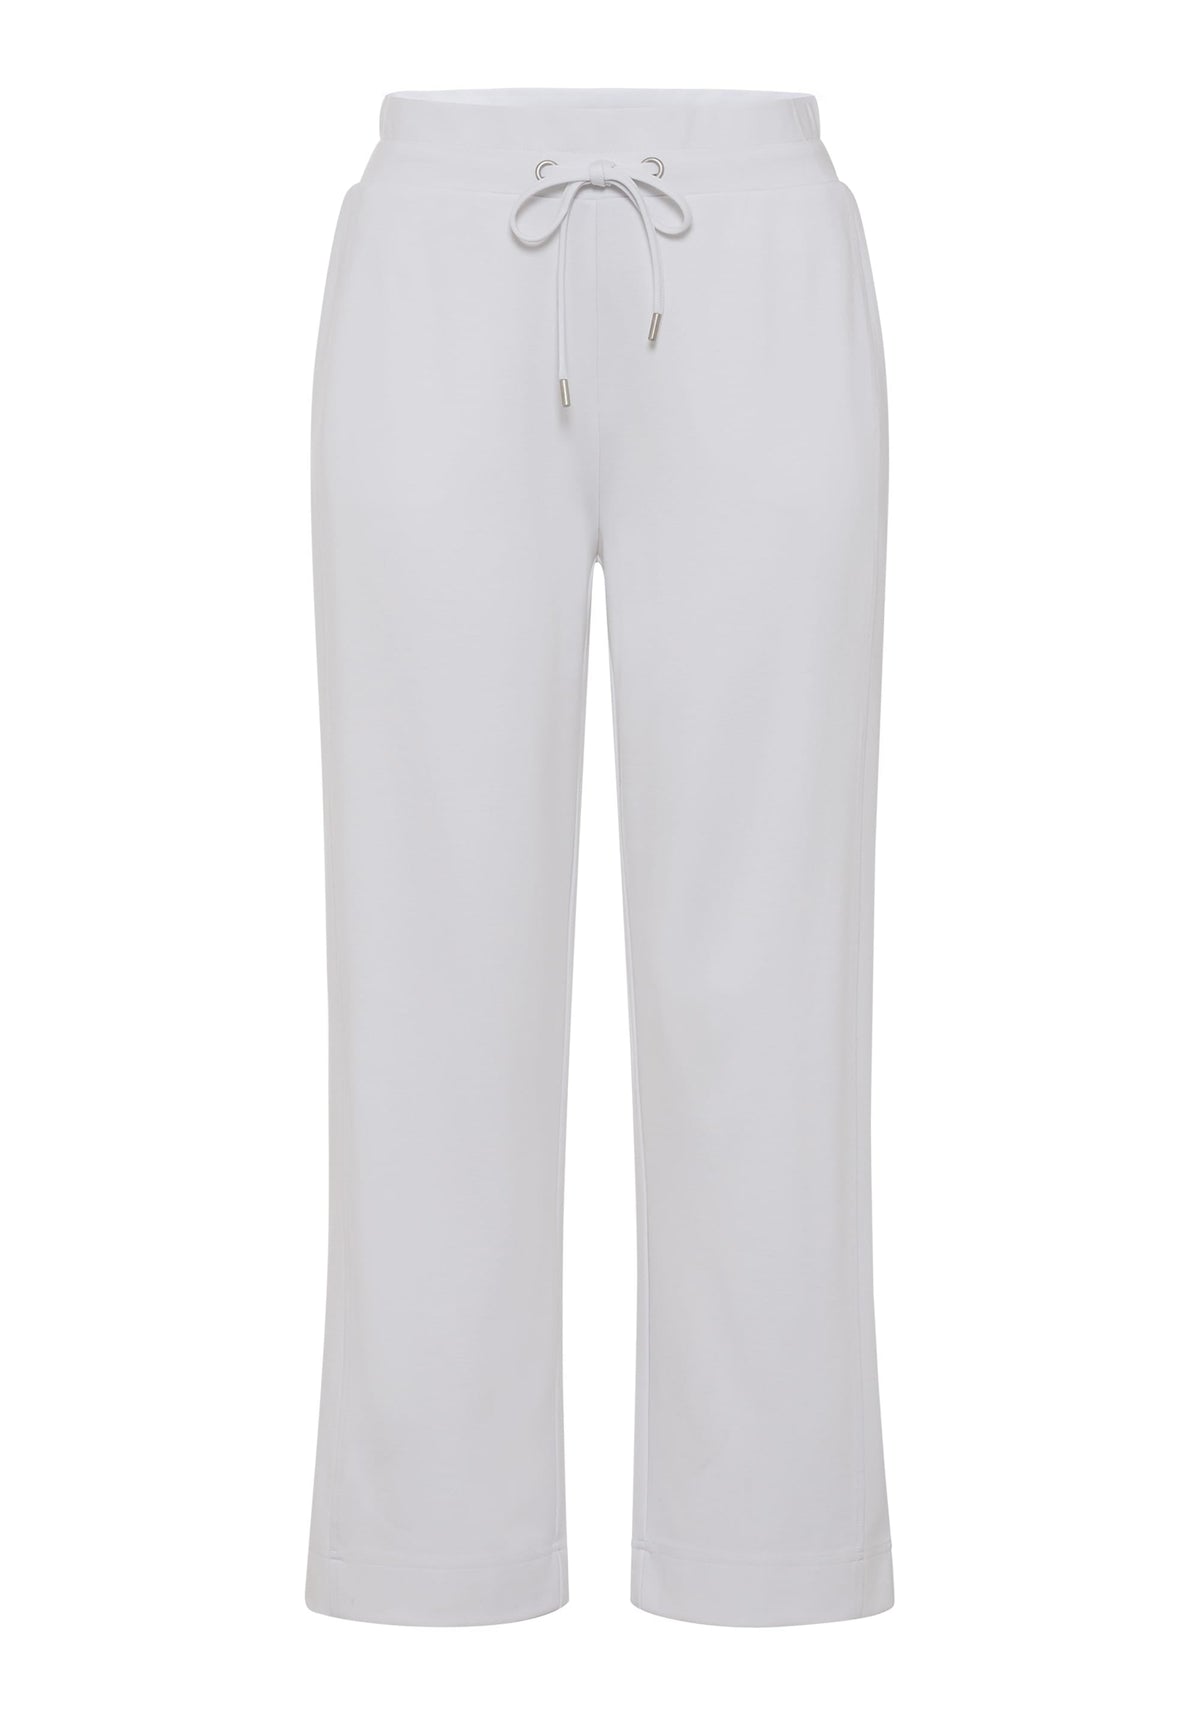 Mona Fit Straight Leg Jersey Knit Pull-On Trouser